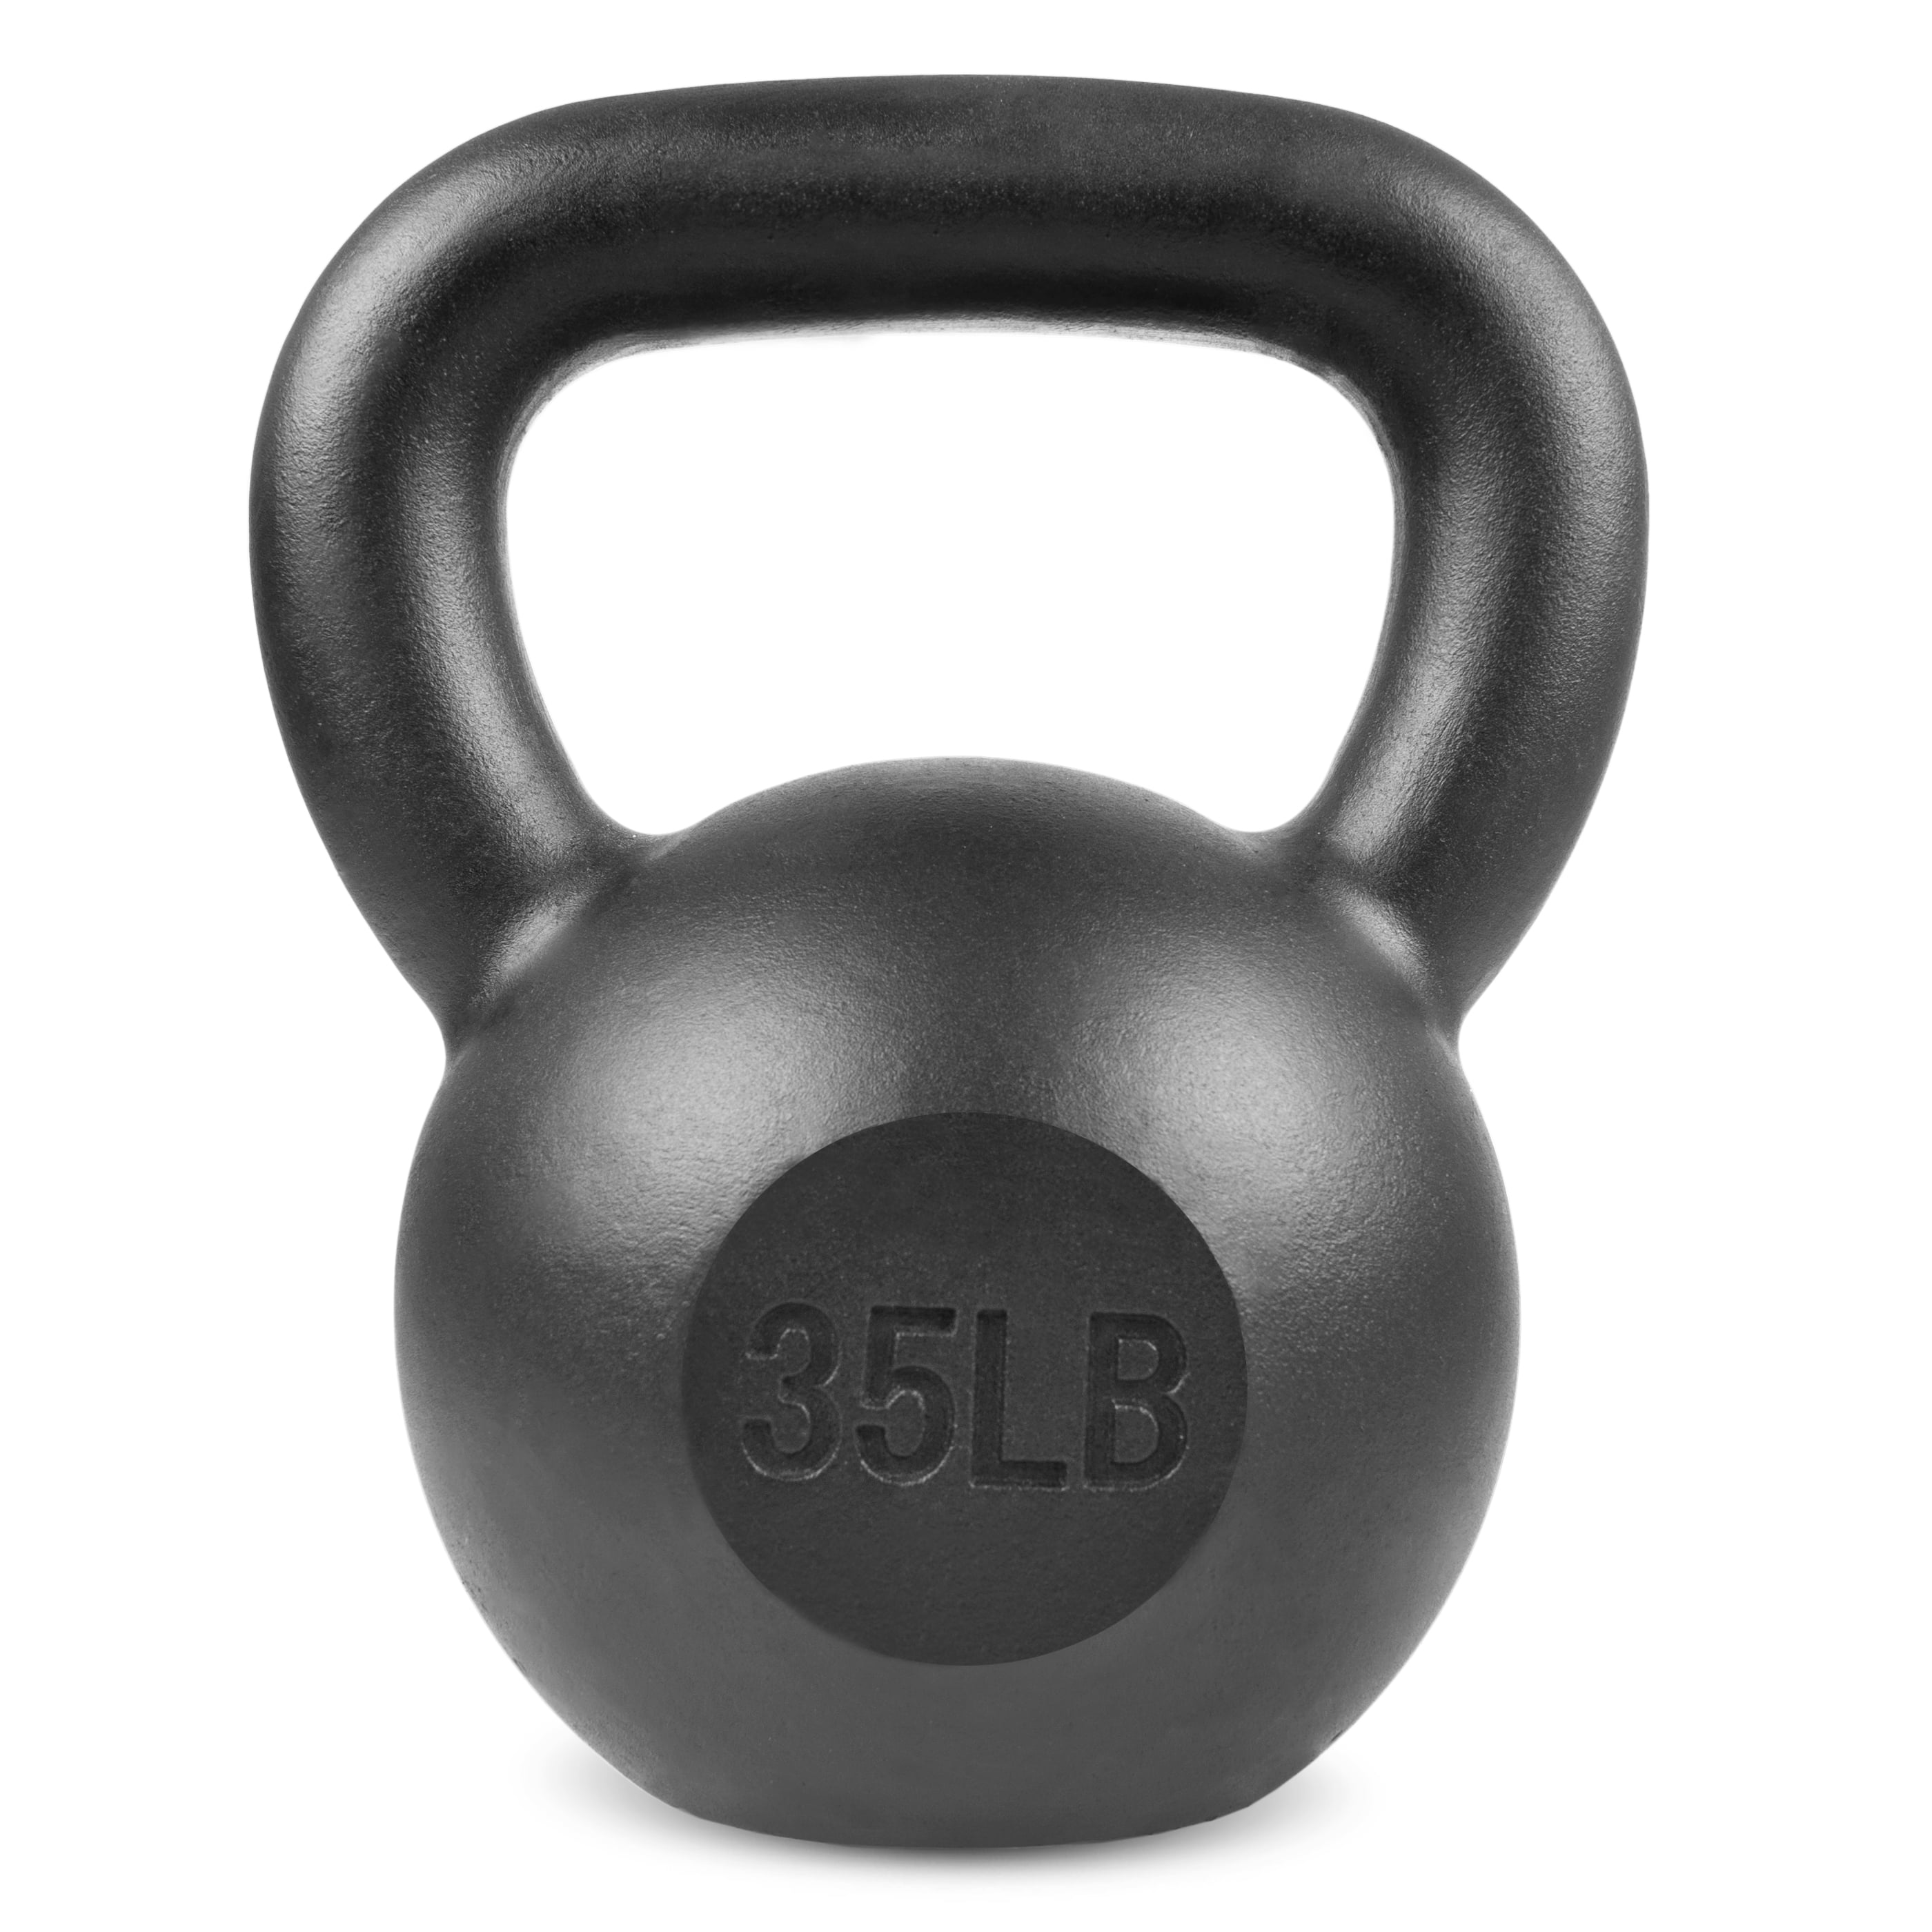 25 and 35 lbs ProSource Vinyl Plastic Kettlebell from 10 20 30 15